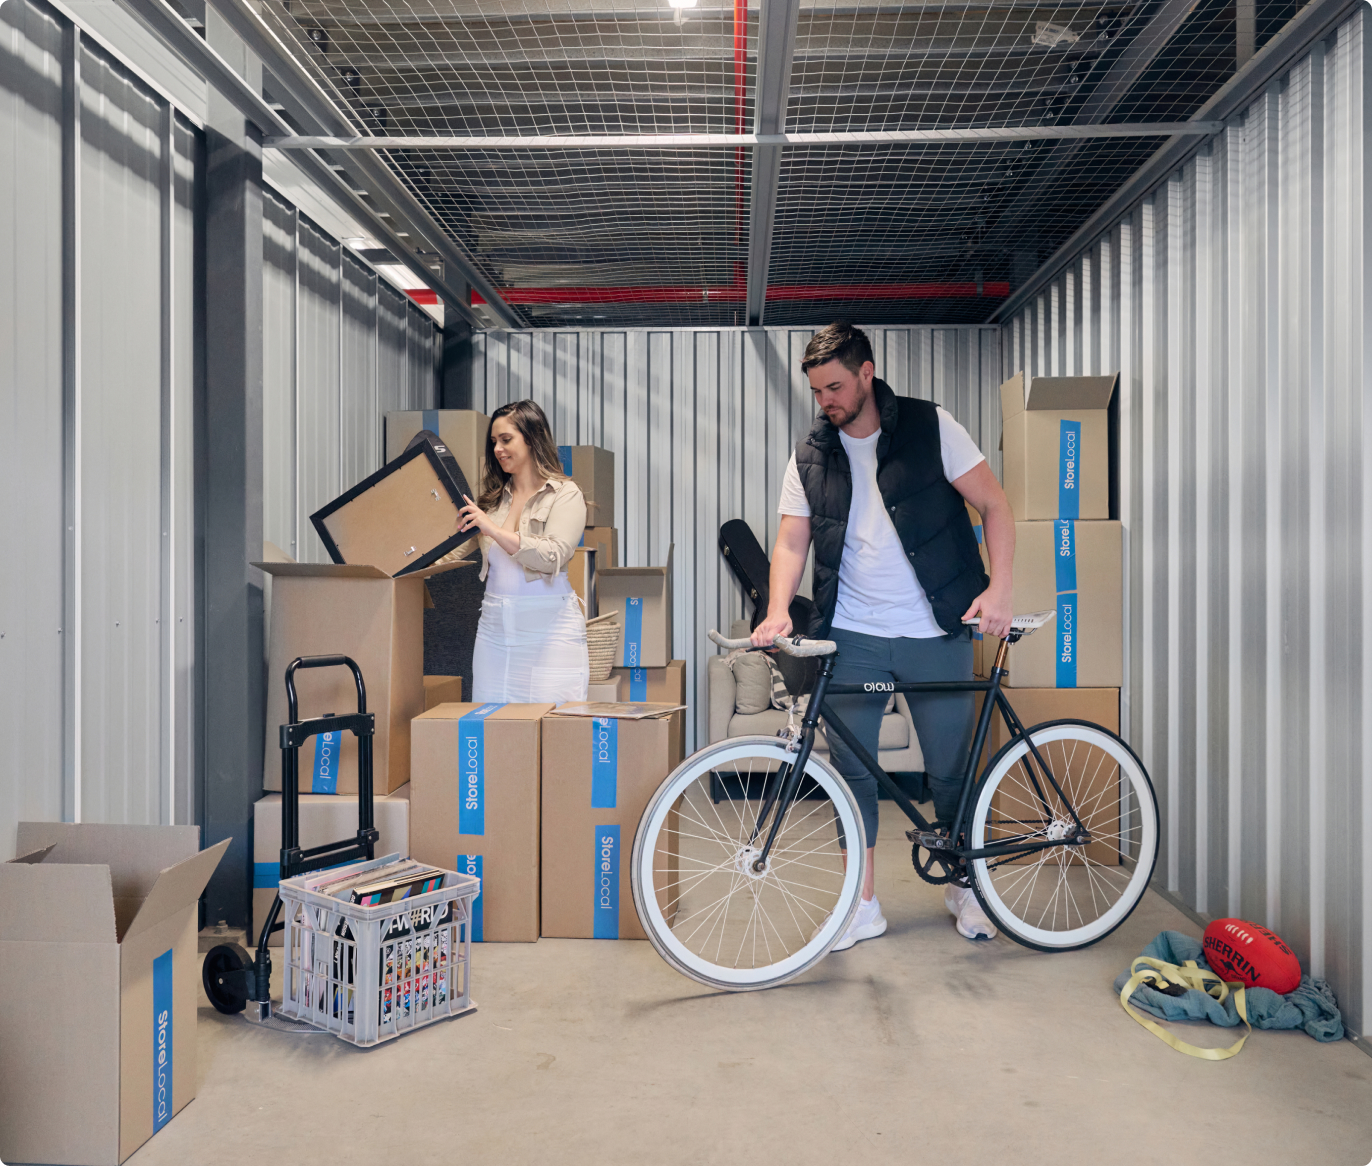 A man and woman standing in a storage room with a bicycle.